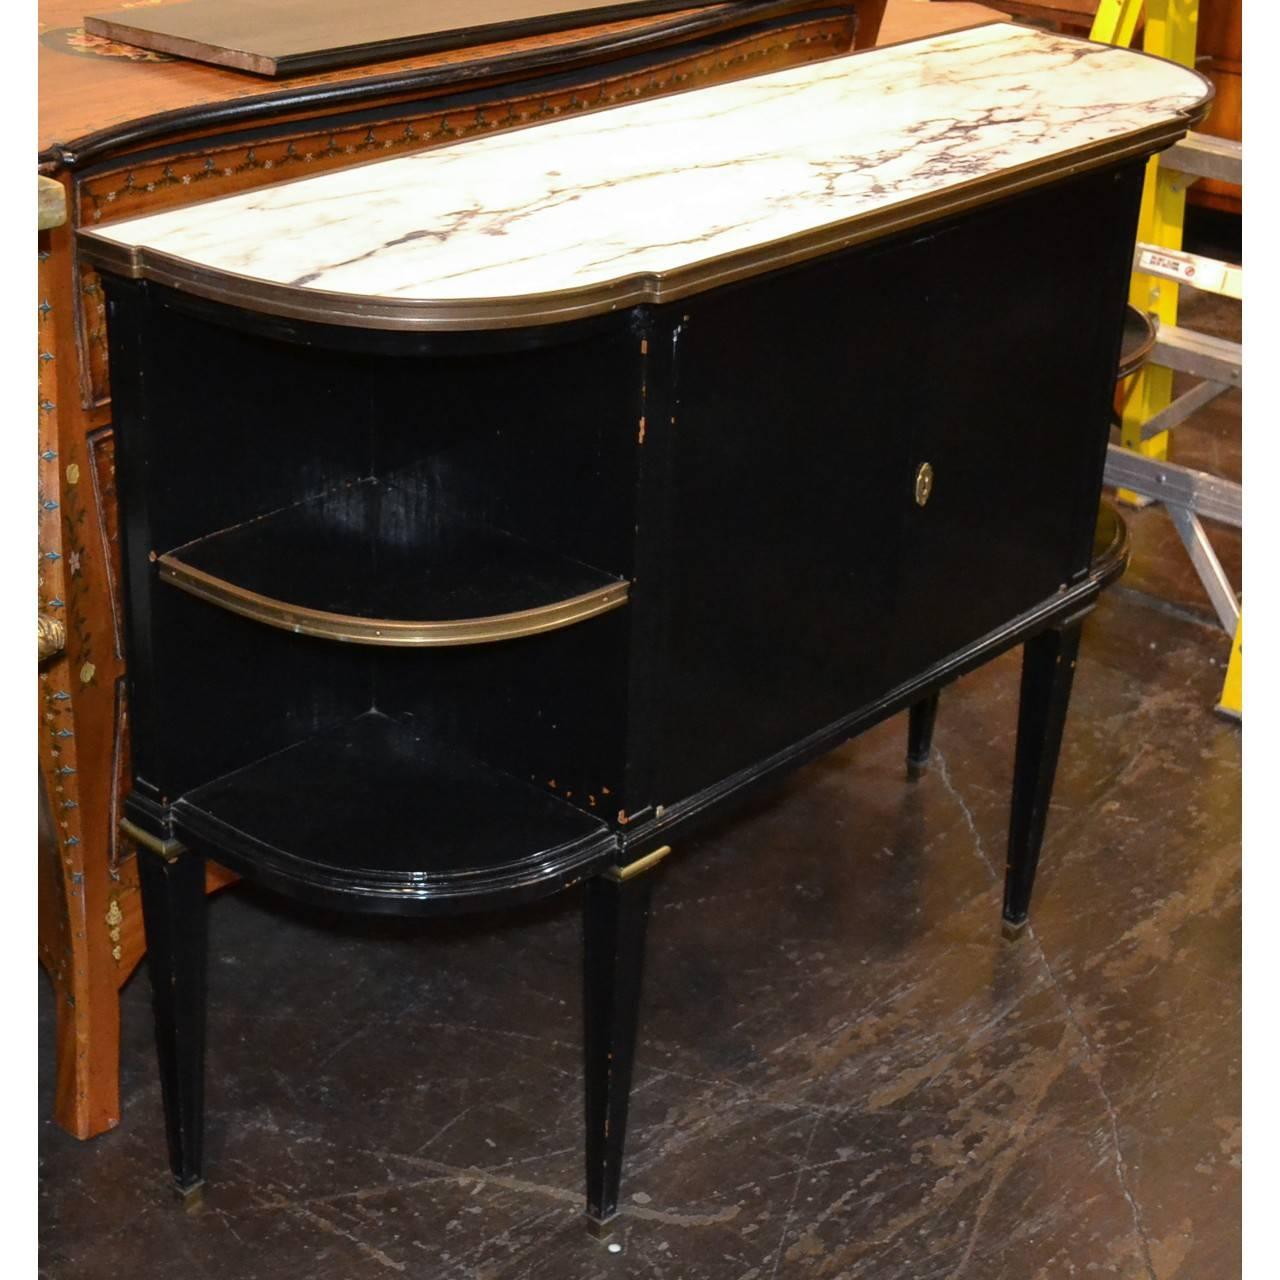 Nice sized French Directoire server in rich black lacquerer with white Carrara marble with deep grey veins. Brass trim. Today's designers are mad to add a piece of black furniture to a room!
circa 1930
Measures: 44.5 inches wide x 33 inches height